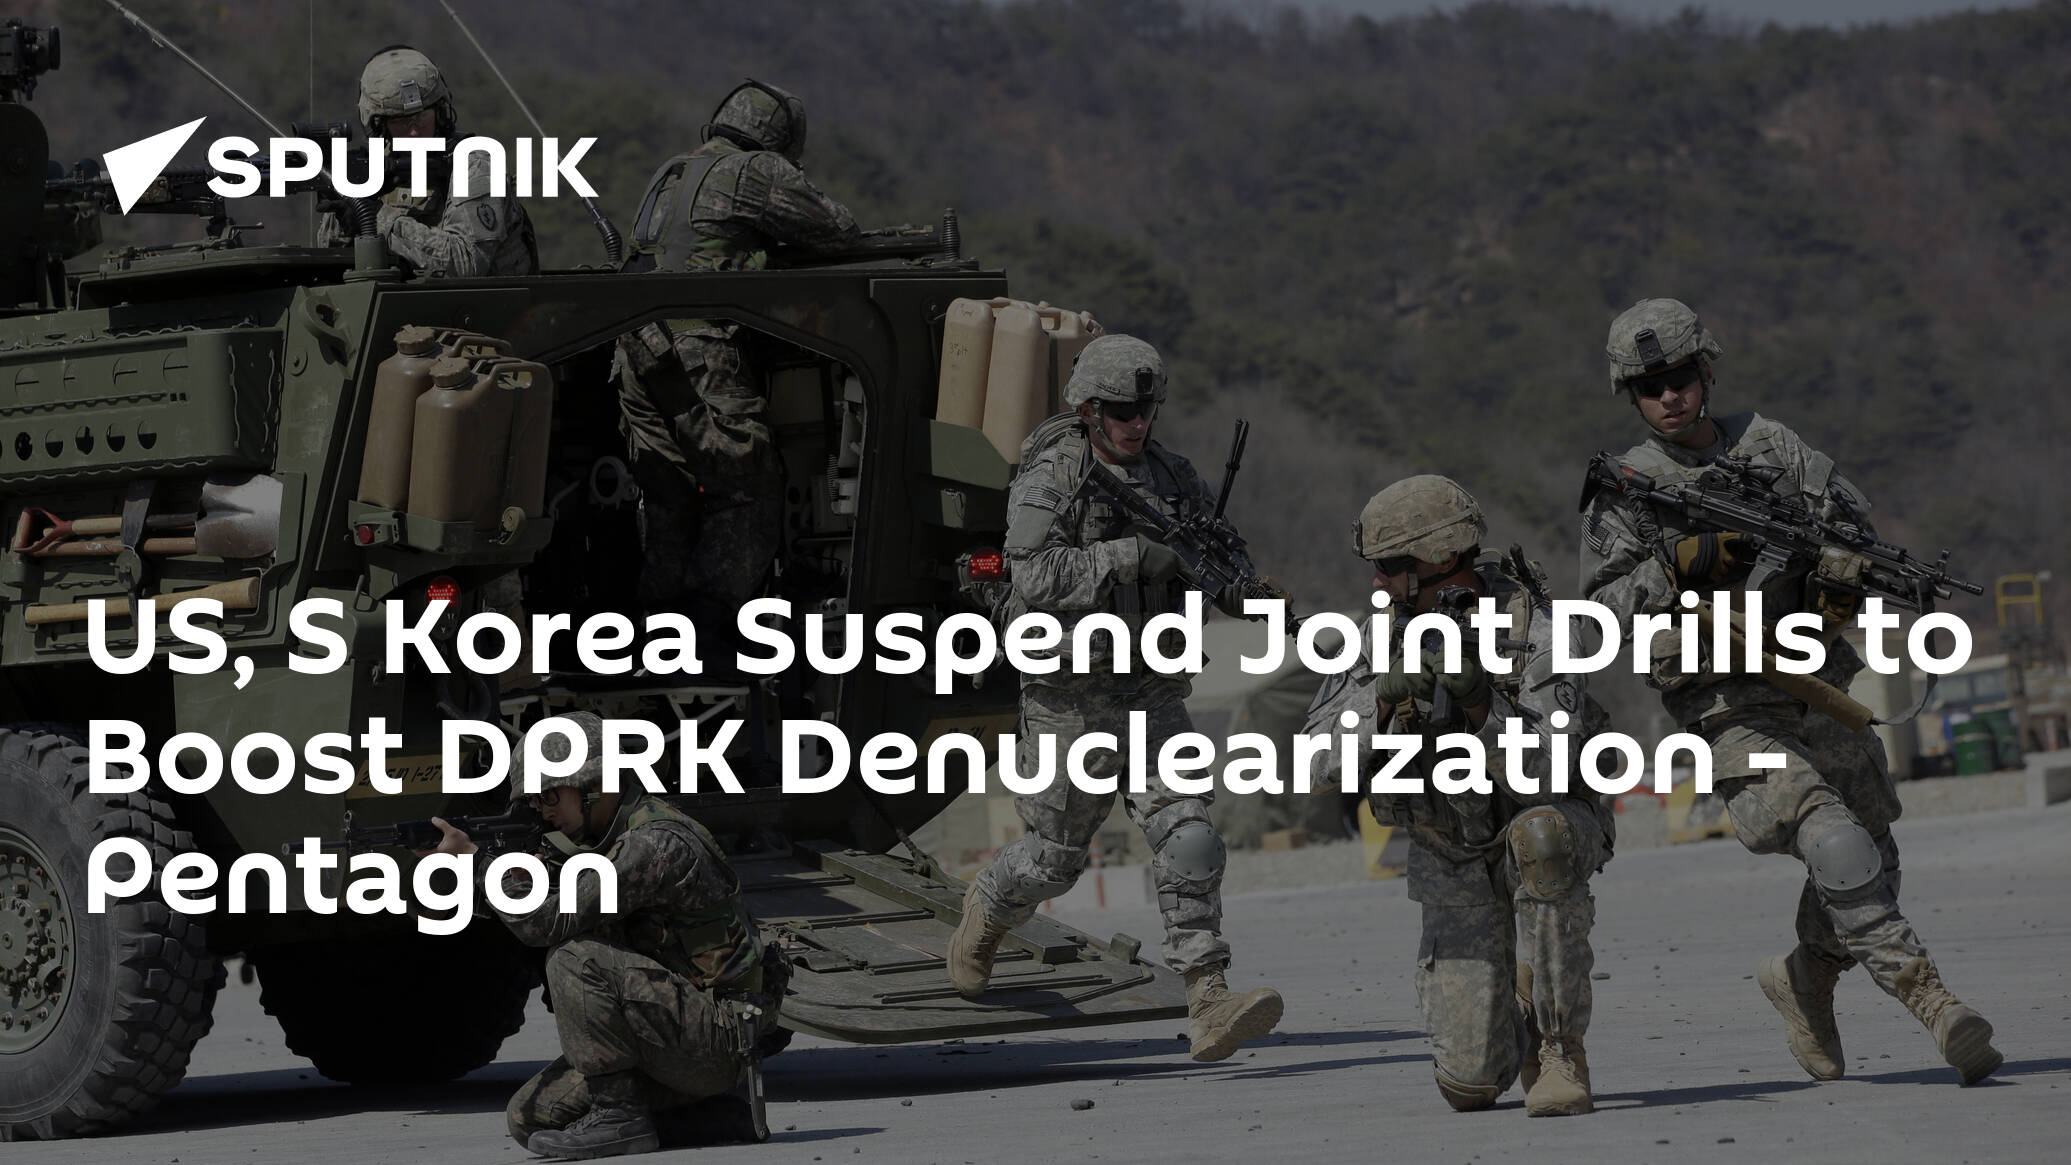 US, S Korea Suspend Joint Drills to Boost DPRK Denuclearization - Pentagon 